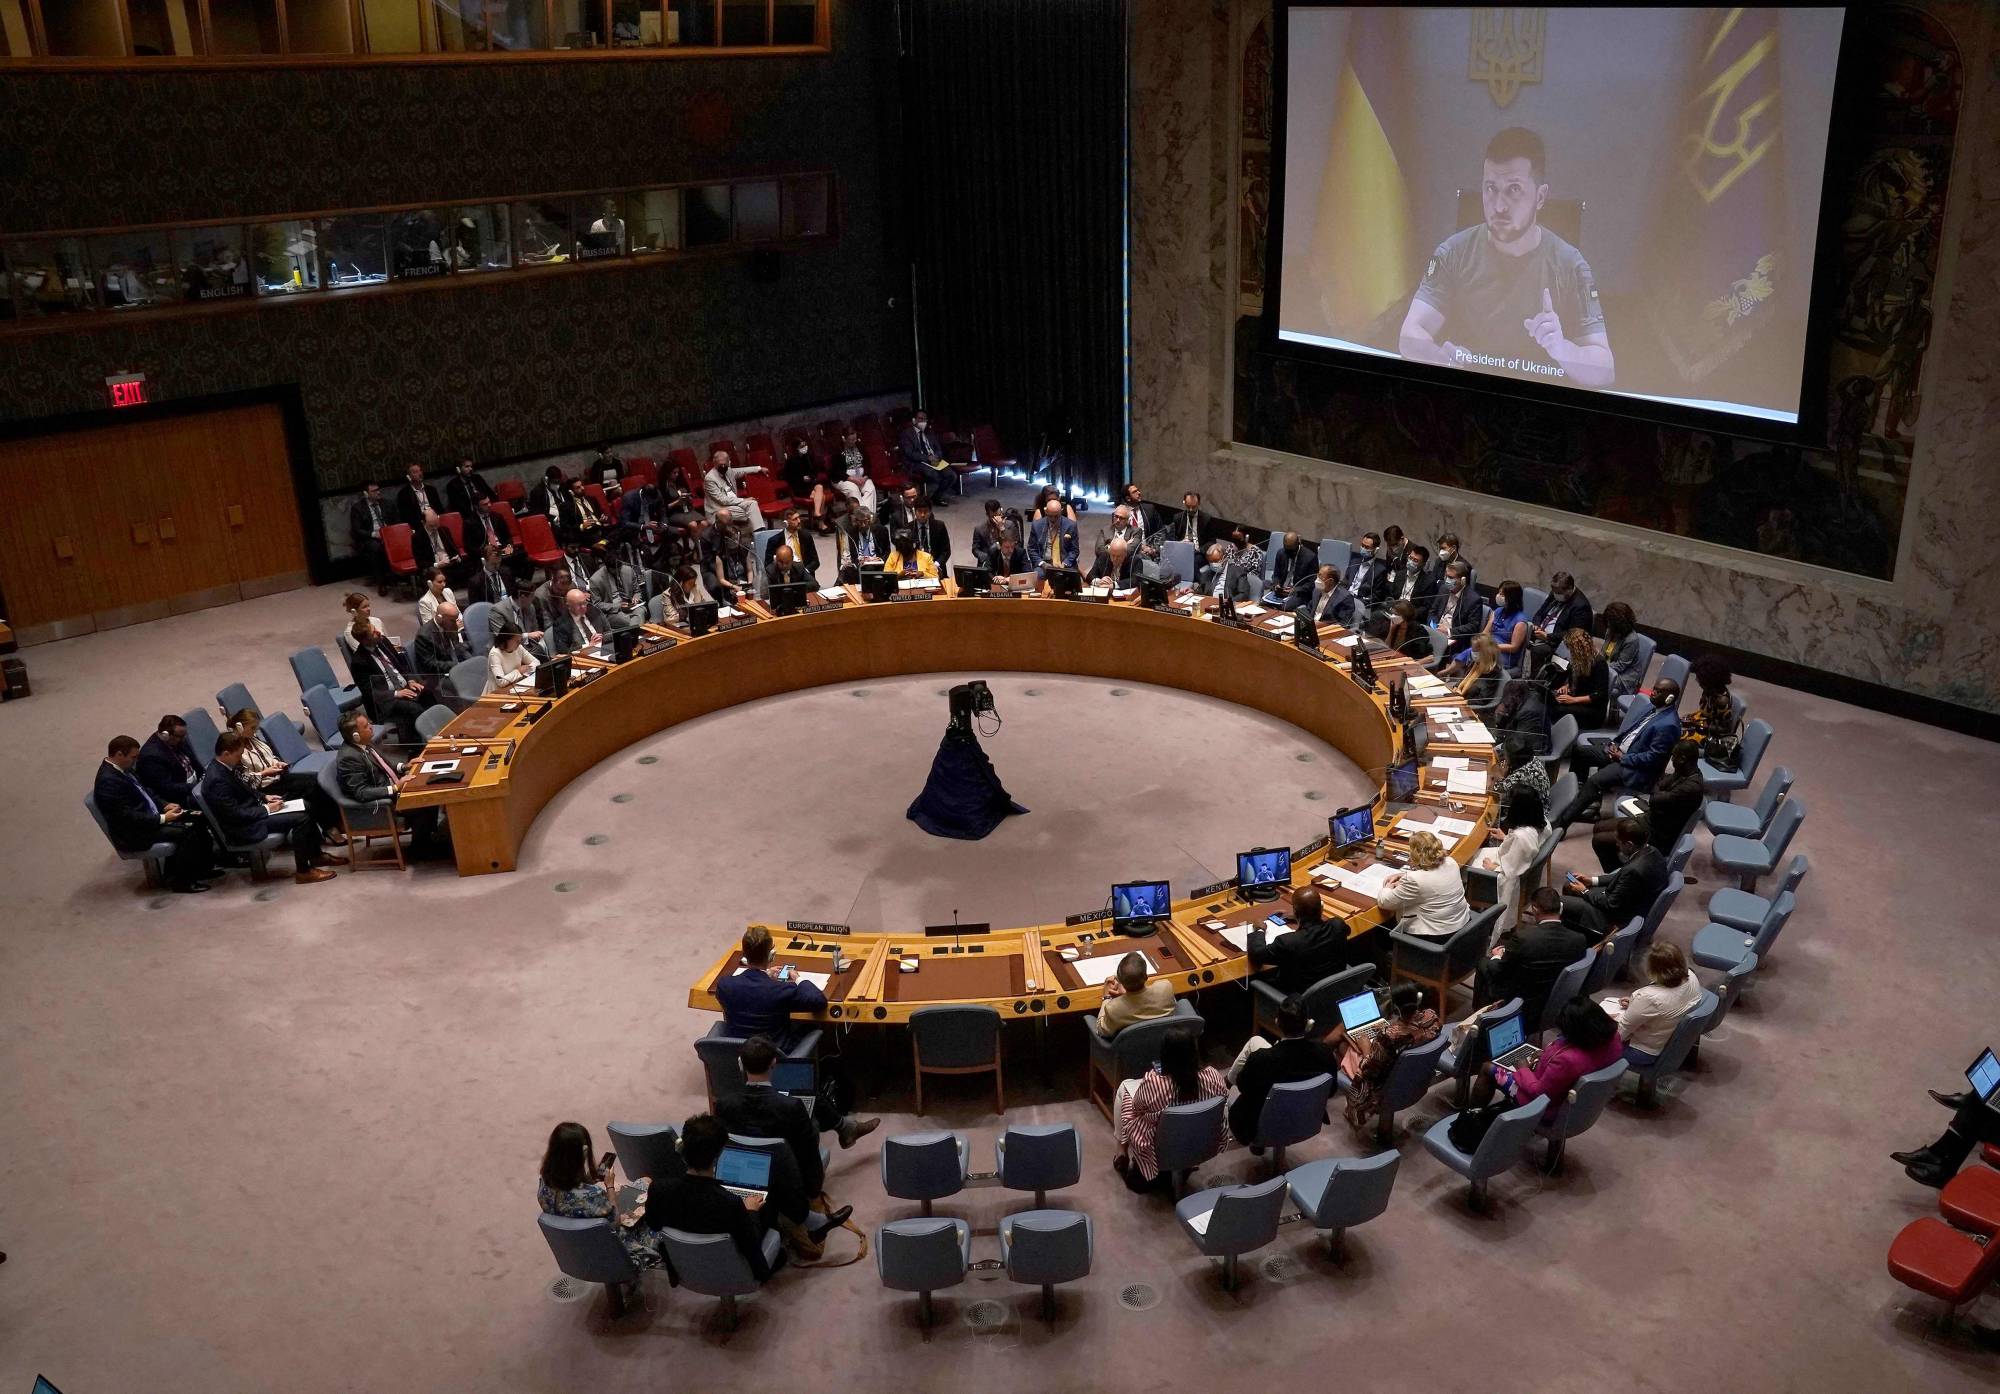 Ukrainian President Volodymyr Zelenskyy appears on a screen as he addresses a U.N. Security Council meeting on the war in Ukraine on Aug. 24 at United Nations headquarters in New York. | AFP-JIJI